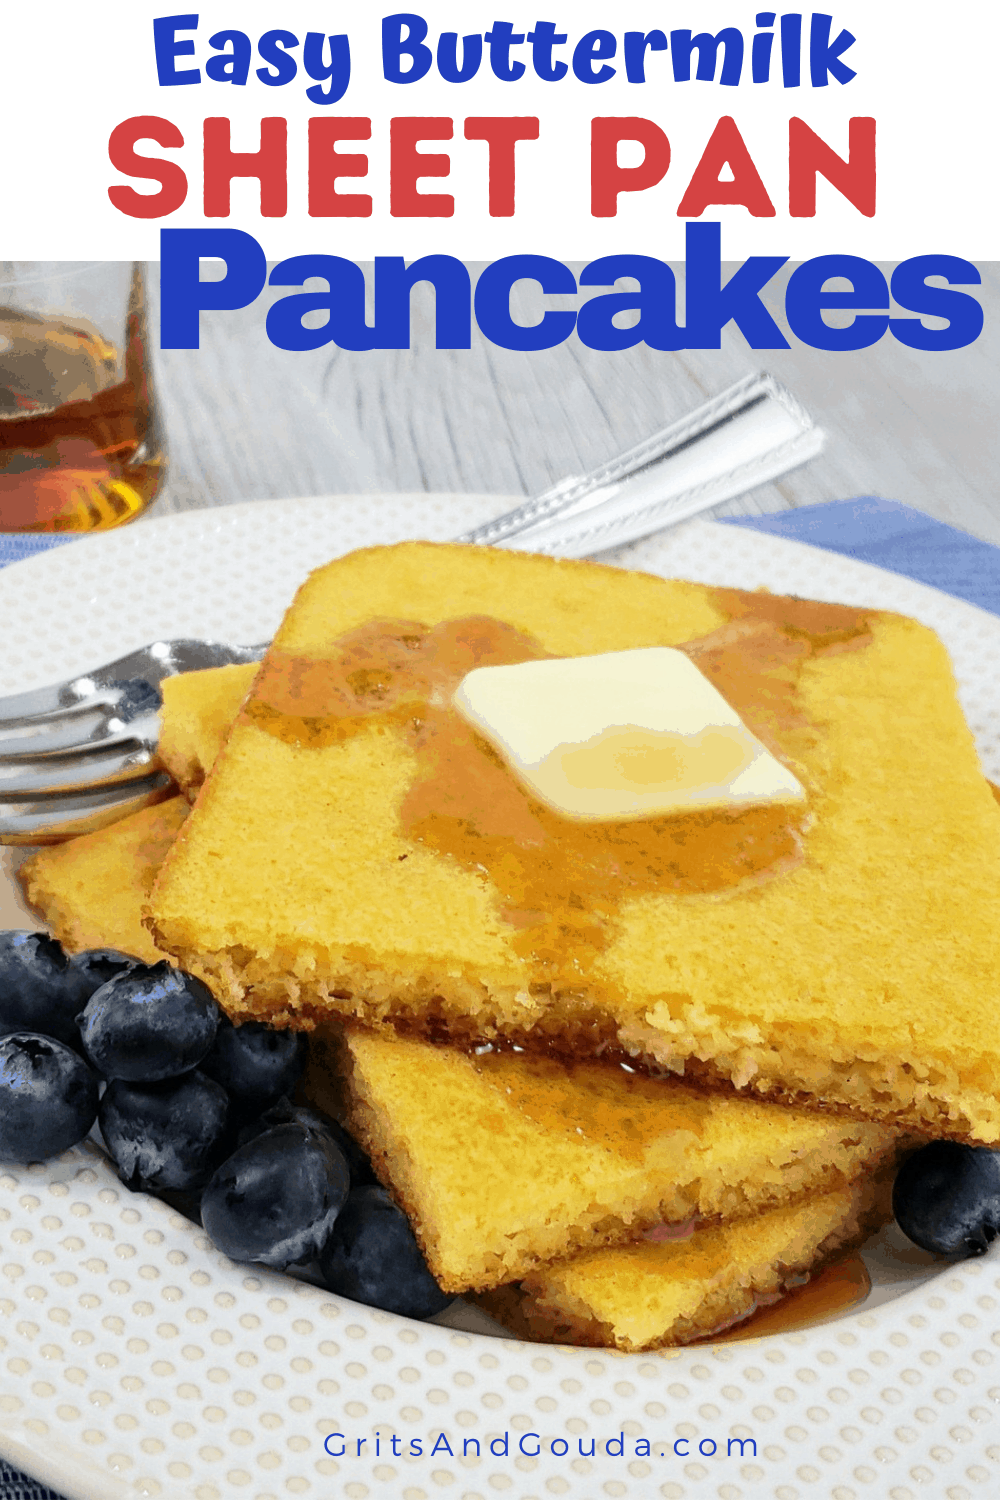 Pinterest Pin for Sheet Pan Pancakes stacked on a plate recipe